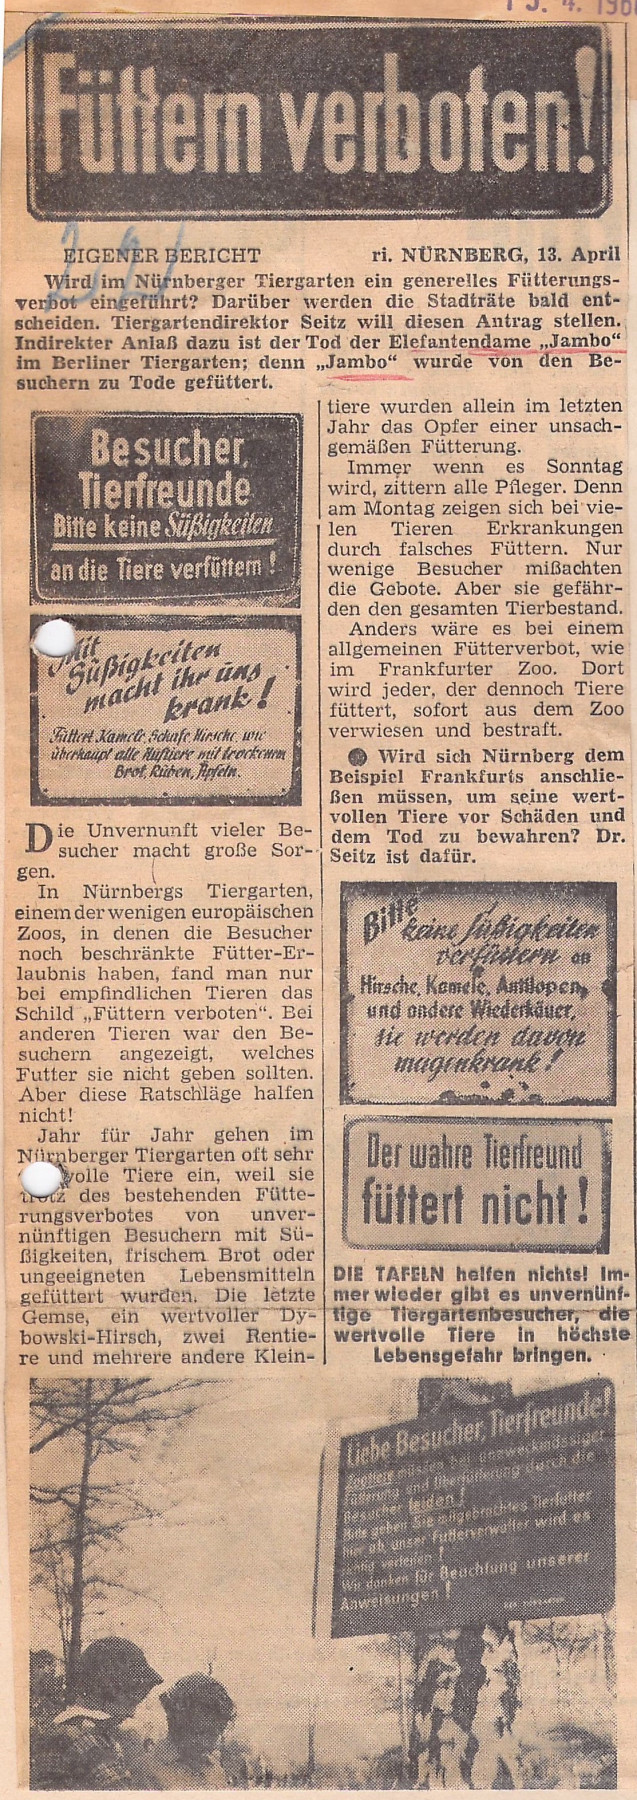 Newspaper clipping. Illustration of prohibition signs: Visitors, animal lovers, please do not feed sweets to the animals; Sweets make us sick; Please do not feed us sweets; Real animal lovers don’t feed the animals; Dear visiting animal lovers (not legible).